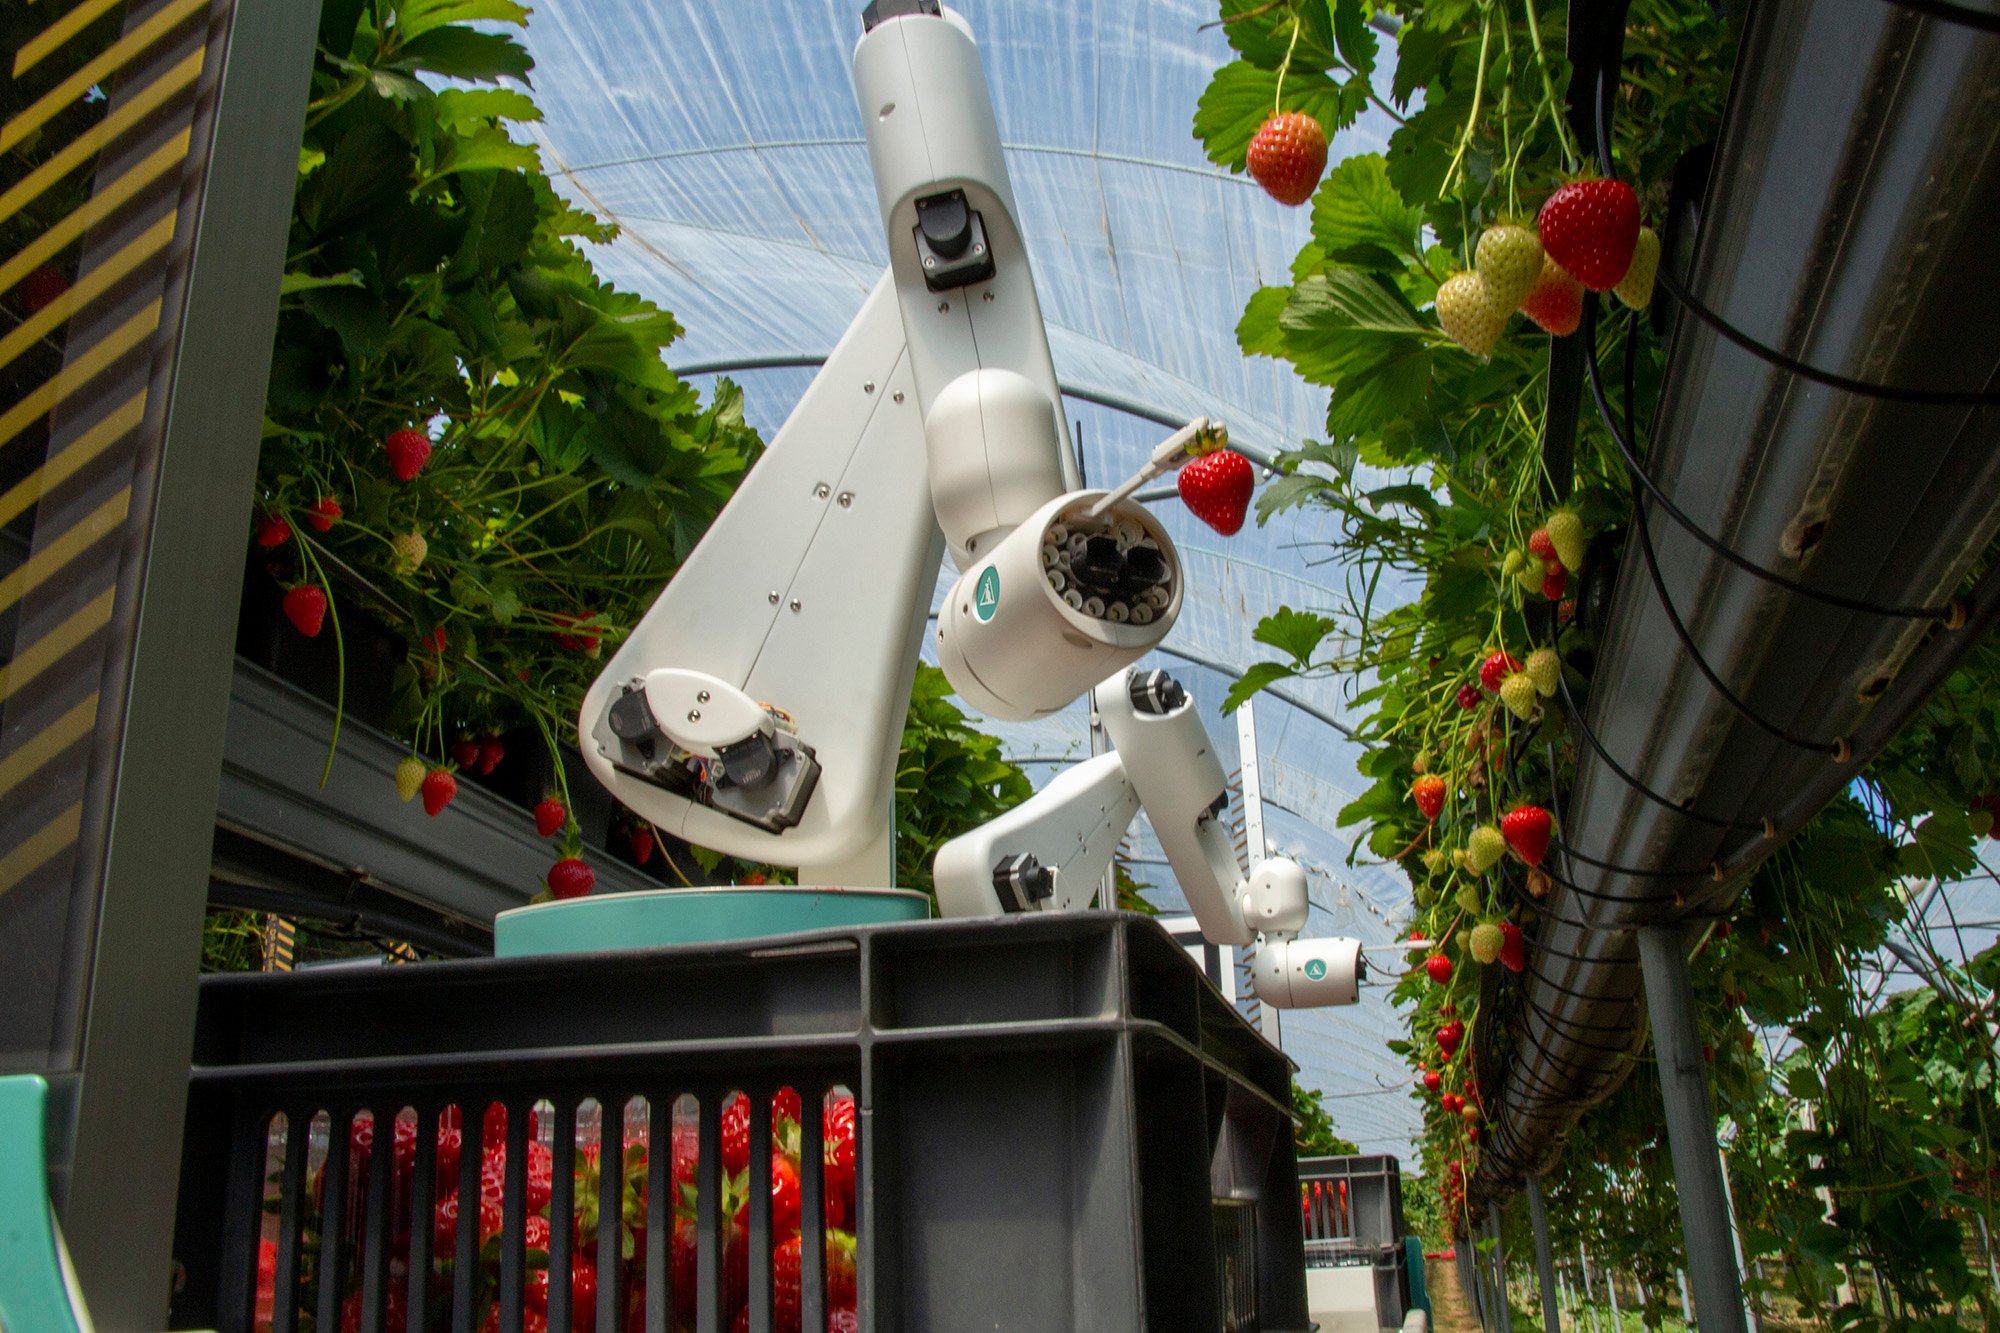 Dogtooth’s strawberry harvesting robot in action